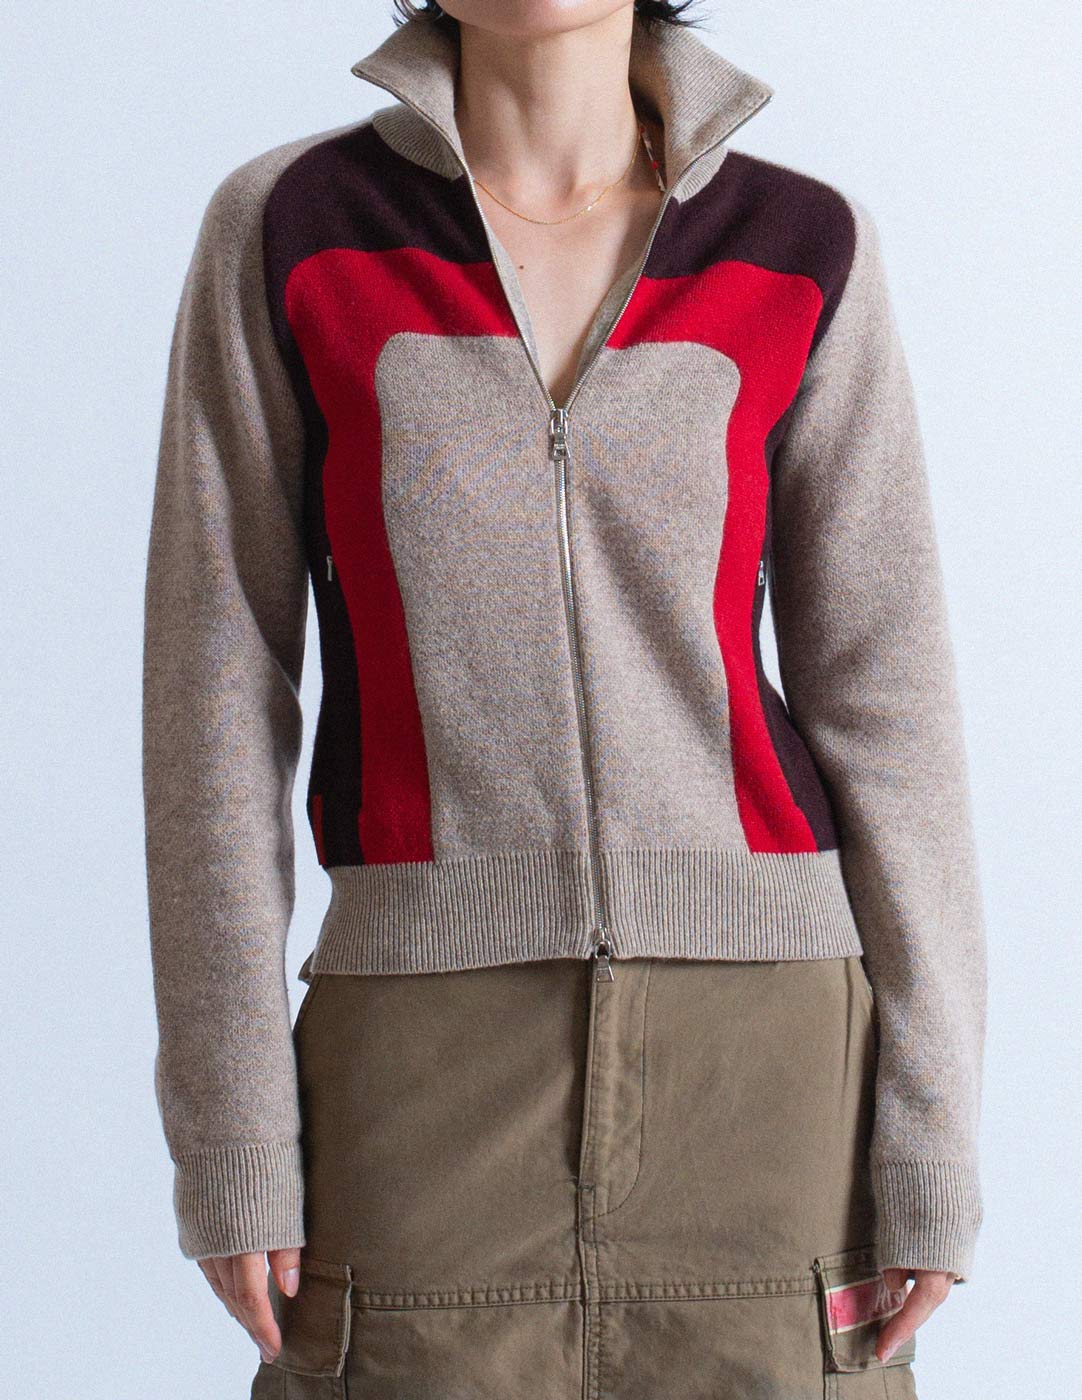 Prada zipped wool and cashmere cardigan front detail